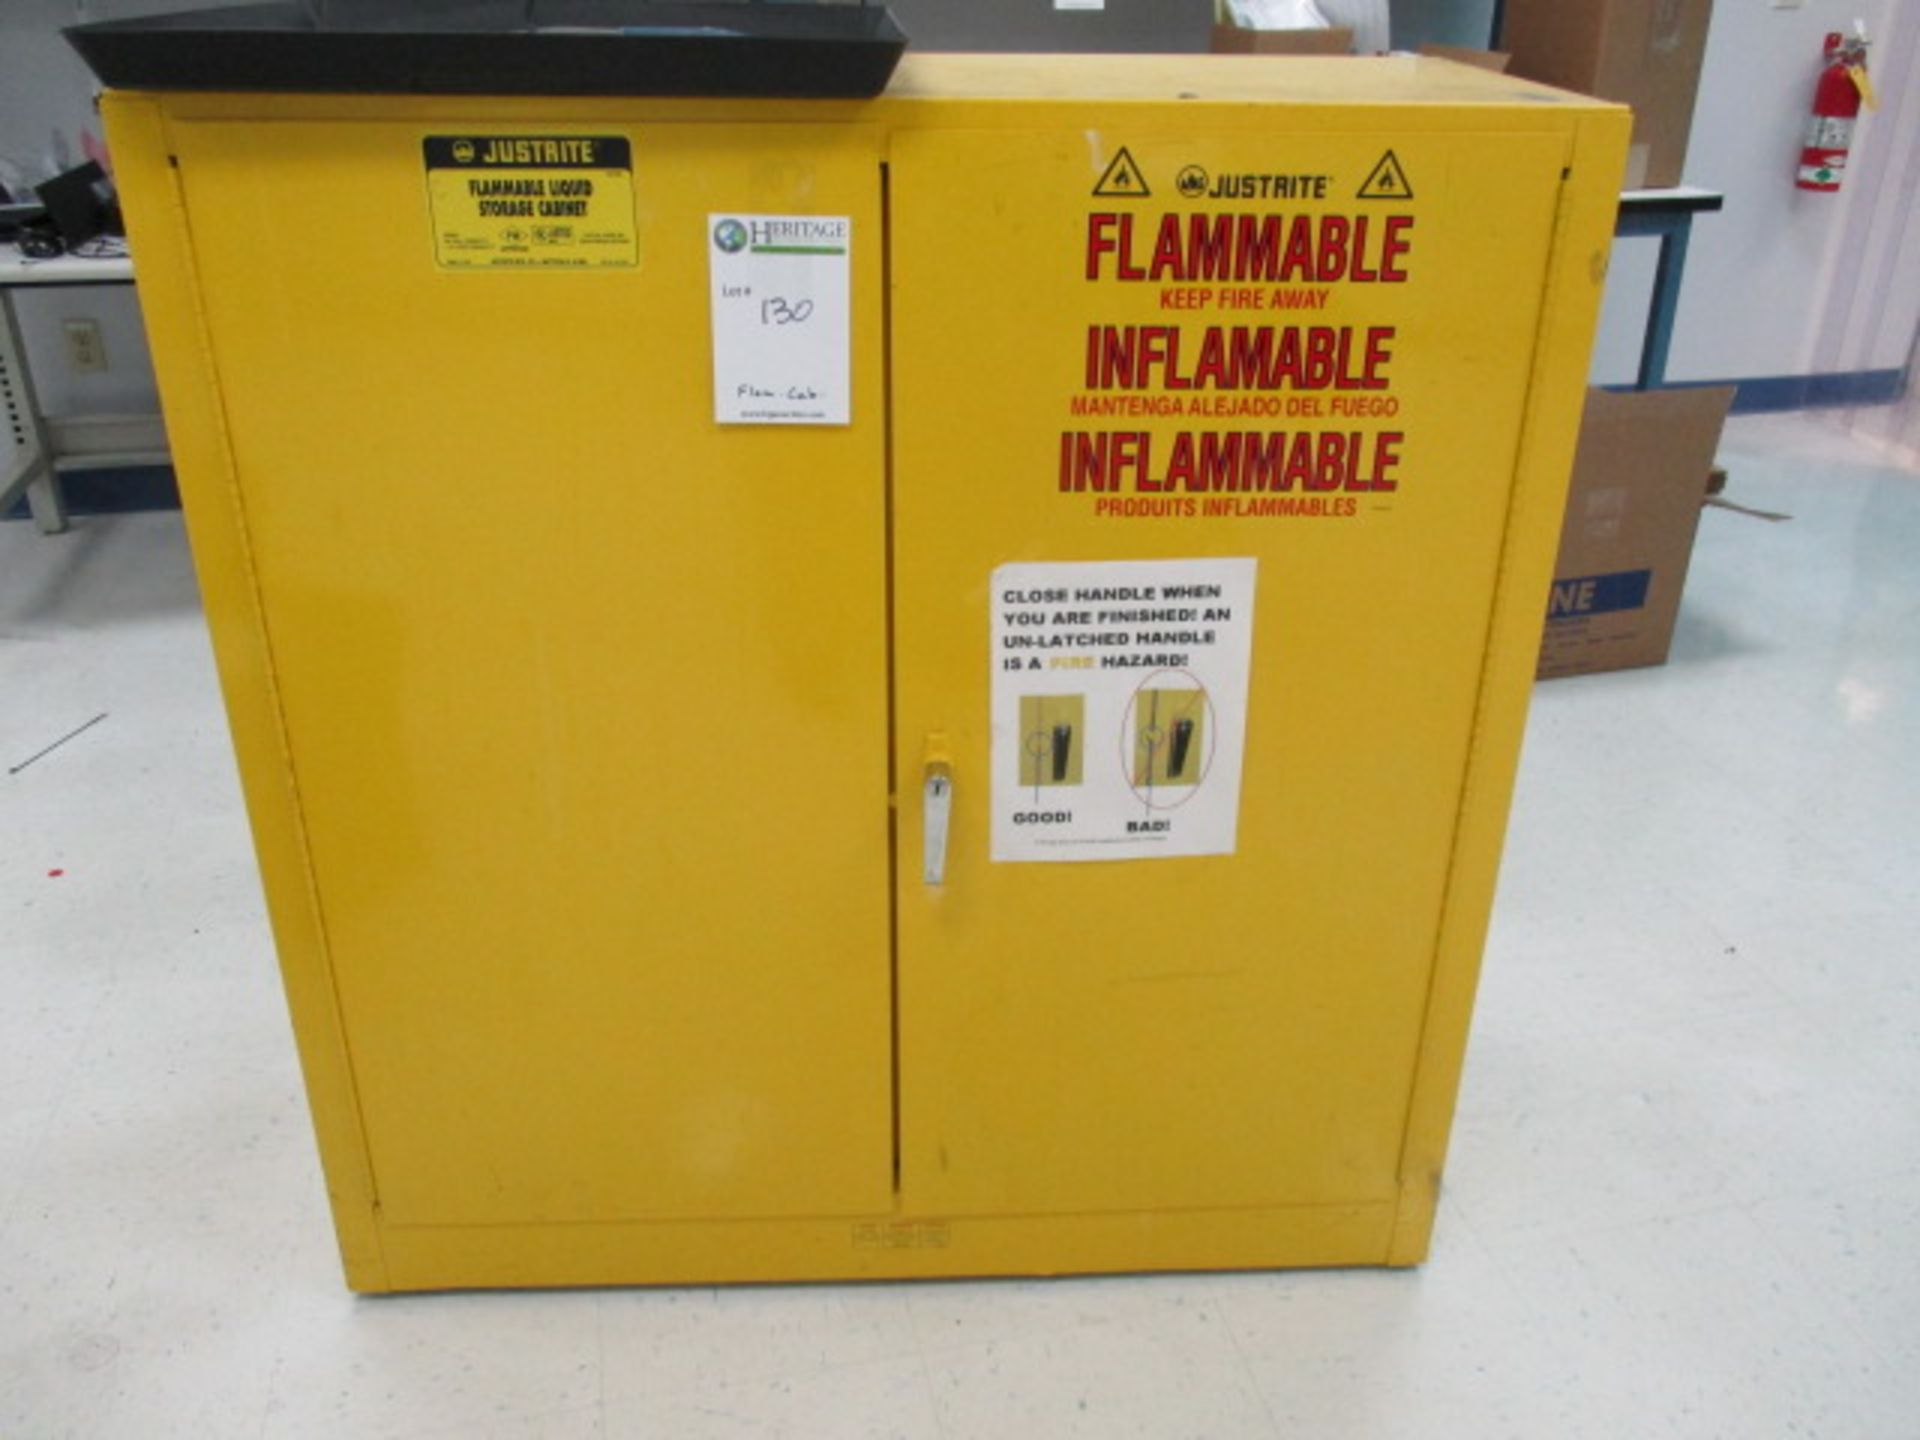 Justrite p/n-25300 Flammable Liquids Storage Cabinet, 30-Gallon Capacity. Also Includes Qty-3